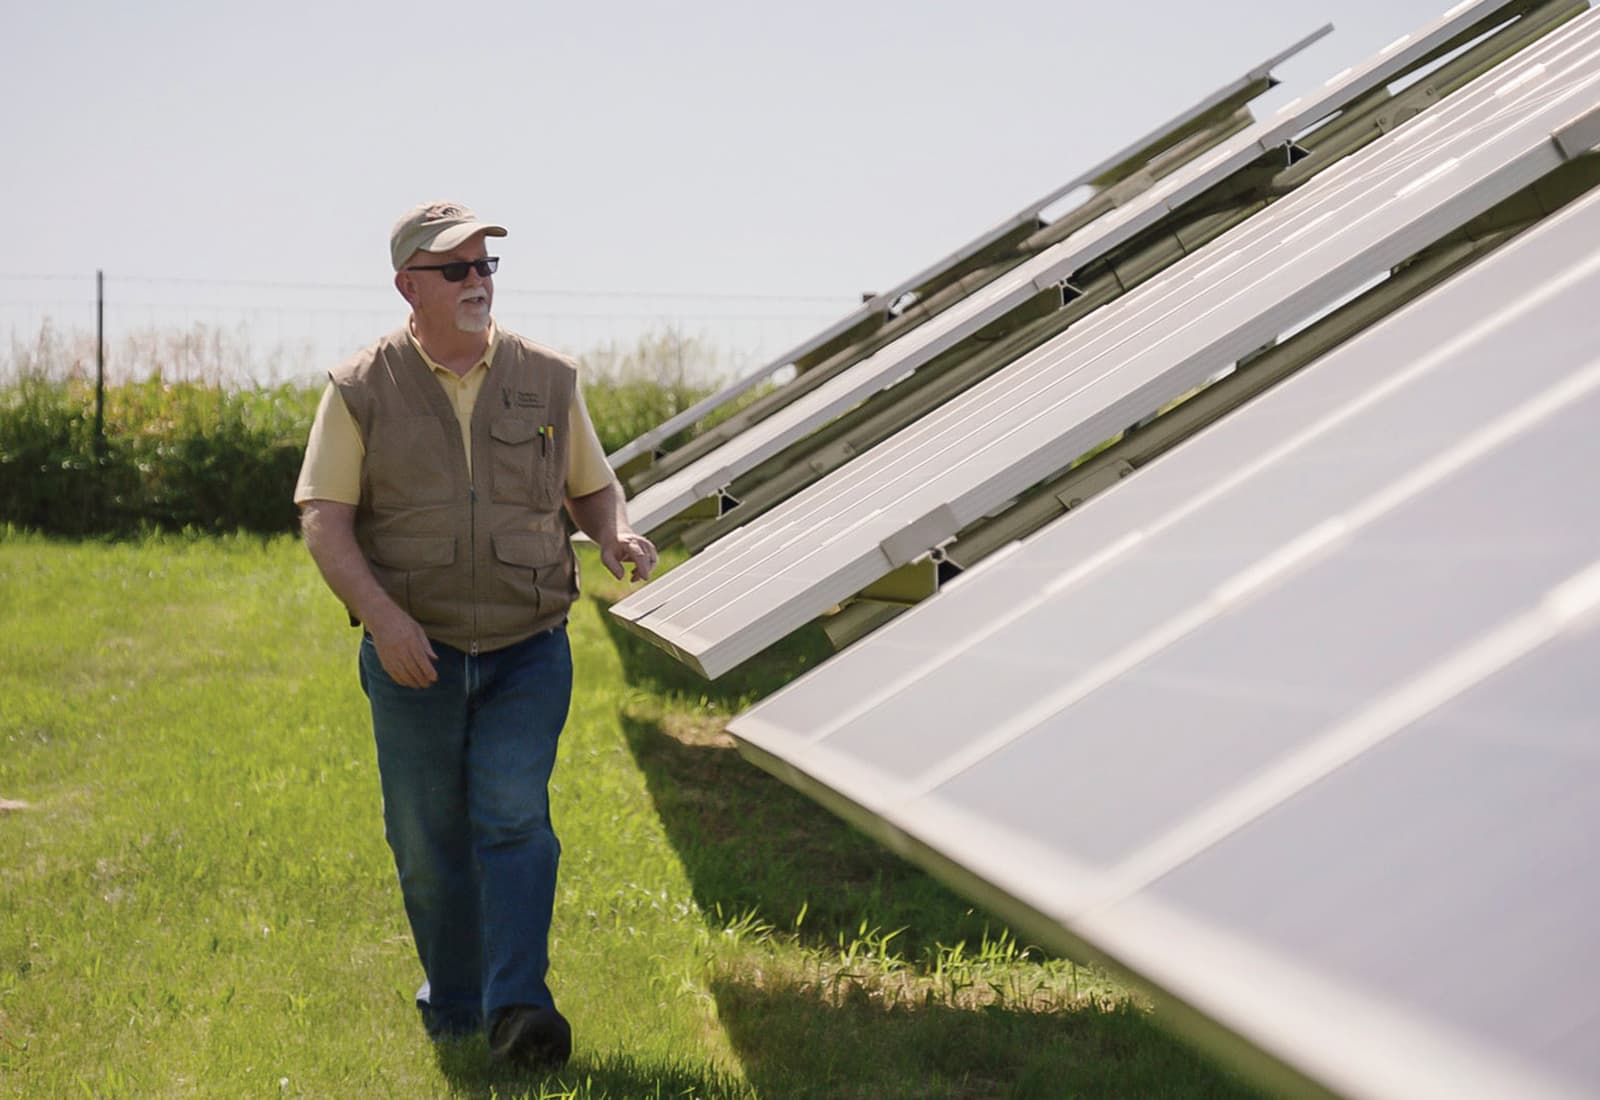 A scene of the solar farm at Farmers Electric Cooperative in Kalona, Iowa from the film "Paris to Pittsburgh," produced by Bloomberg Philanthropies in partnership with Radical Media, and distributed by National Geographic Channel.